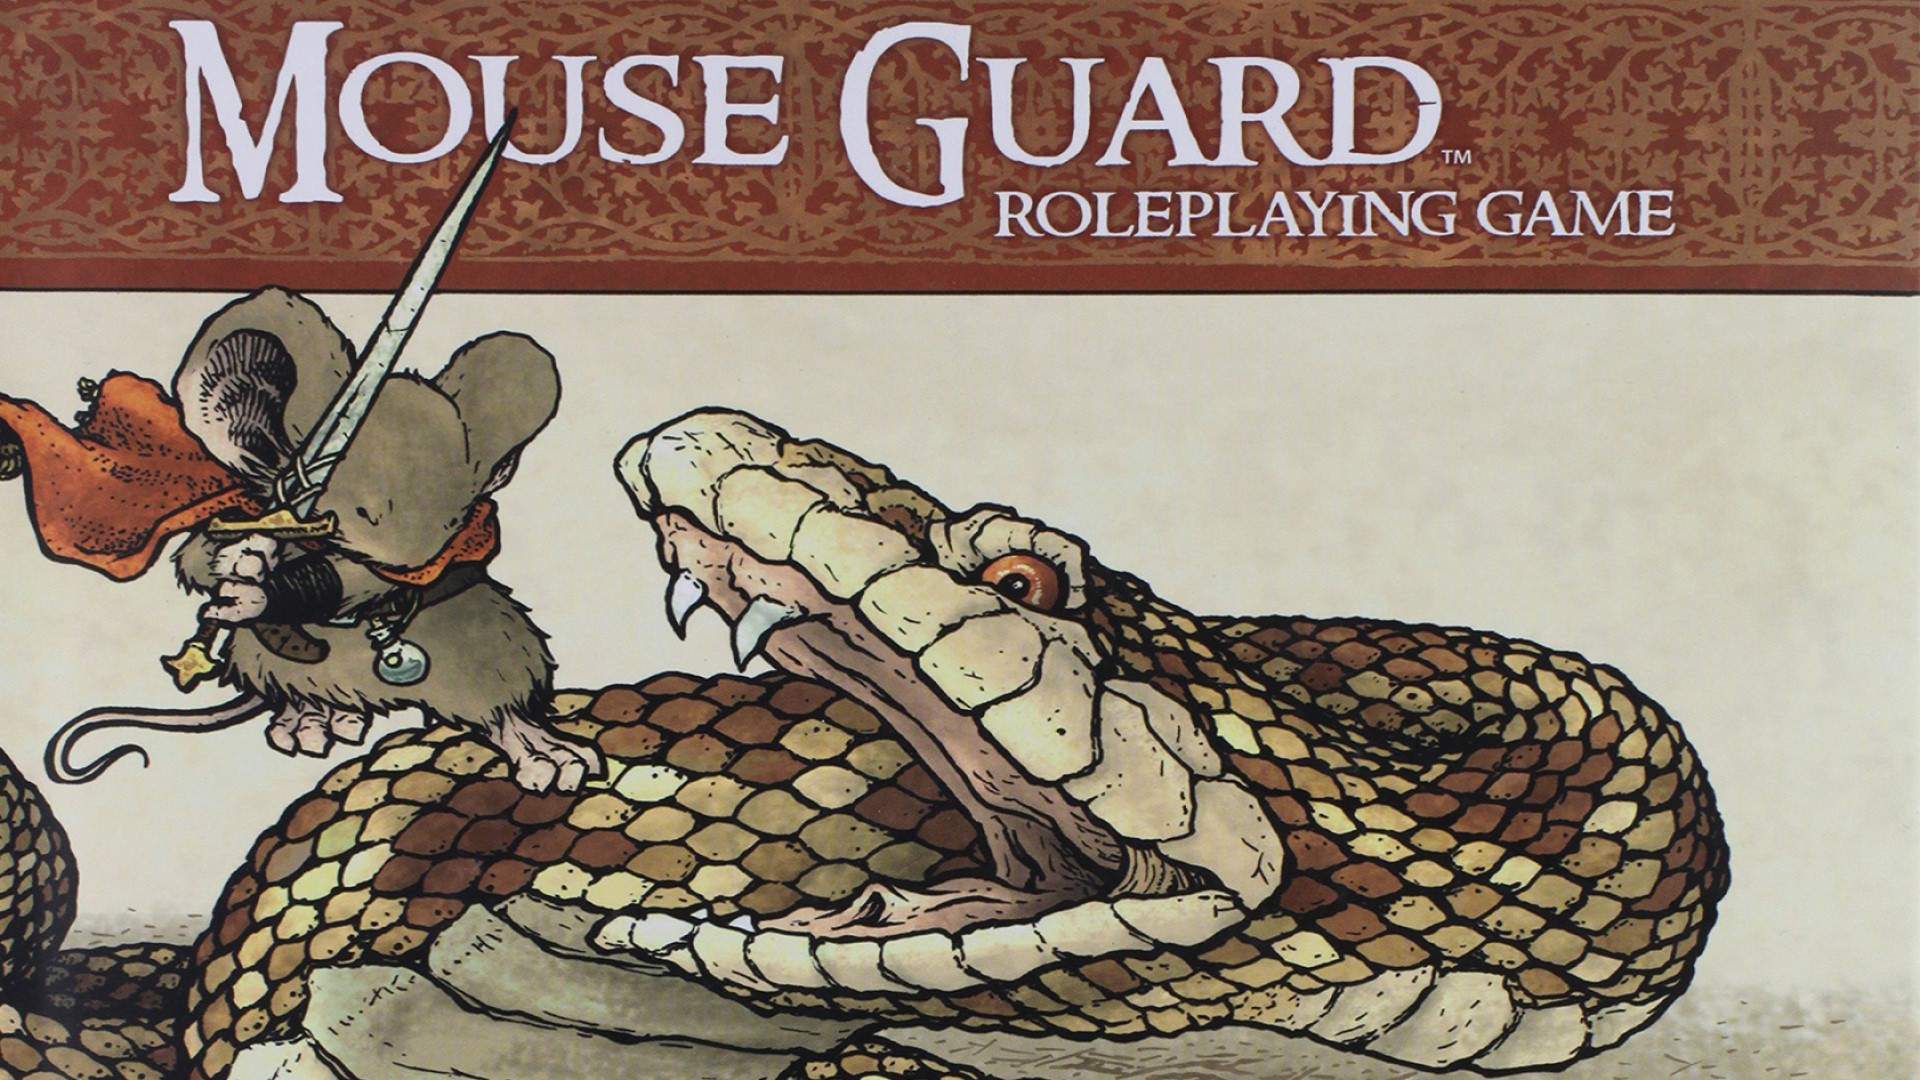 Best tabletop RPGs - Mouse Guard artwork showing a Mouse Guard with a sword fighting a giant snake